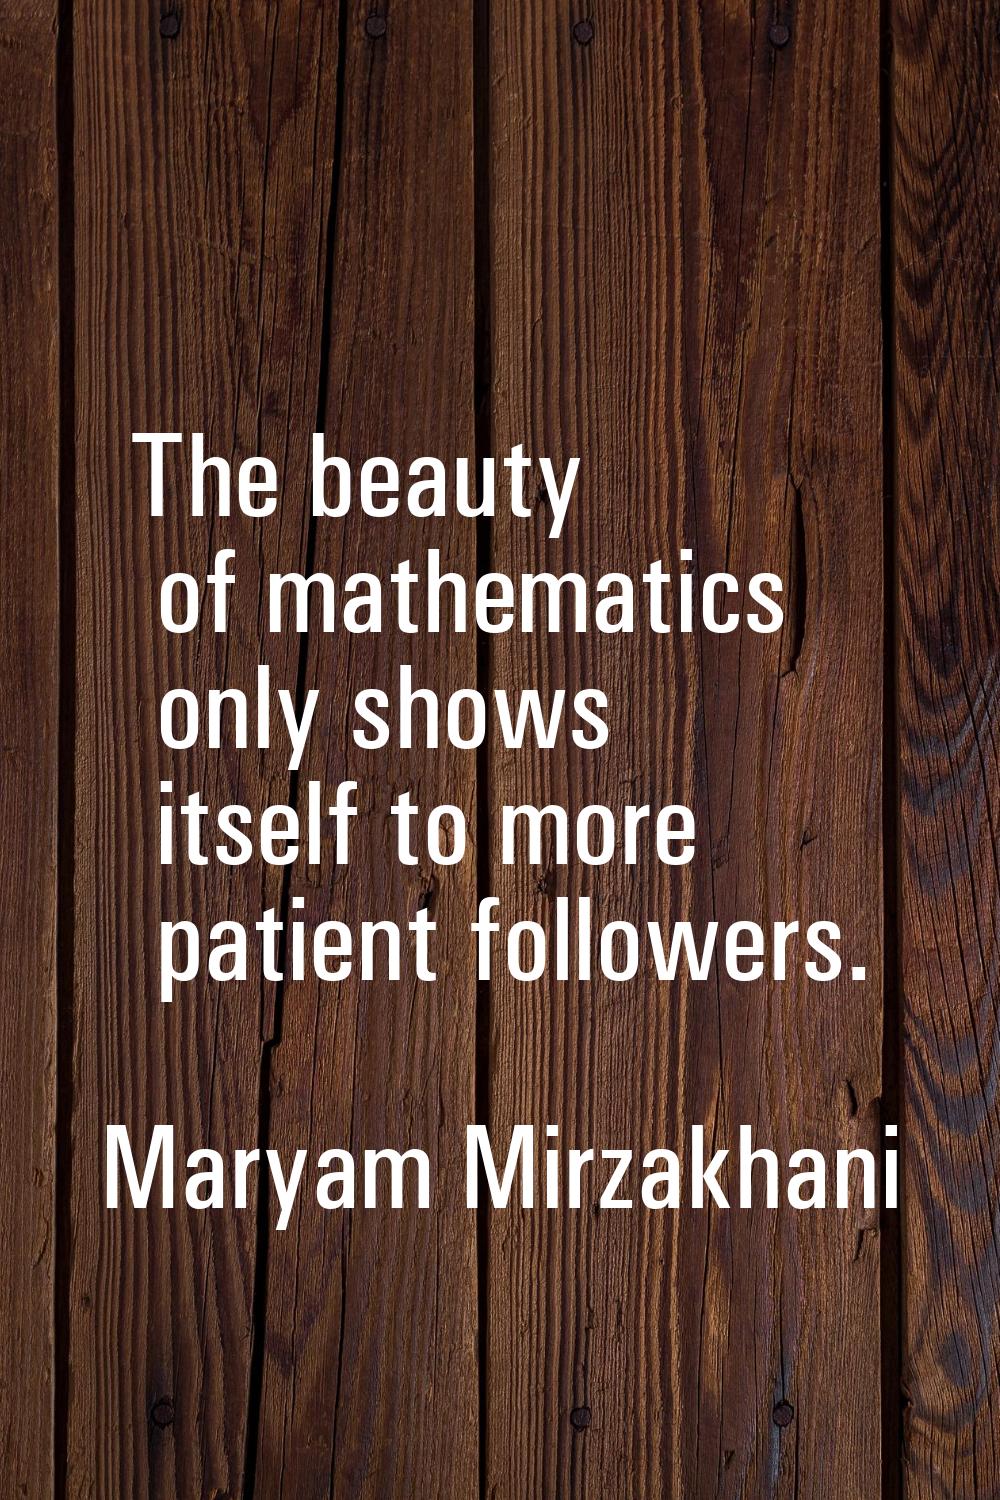 The beauty of mathematics only shows itself to more patient followers.